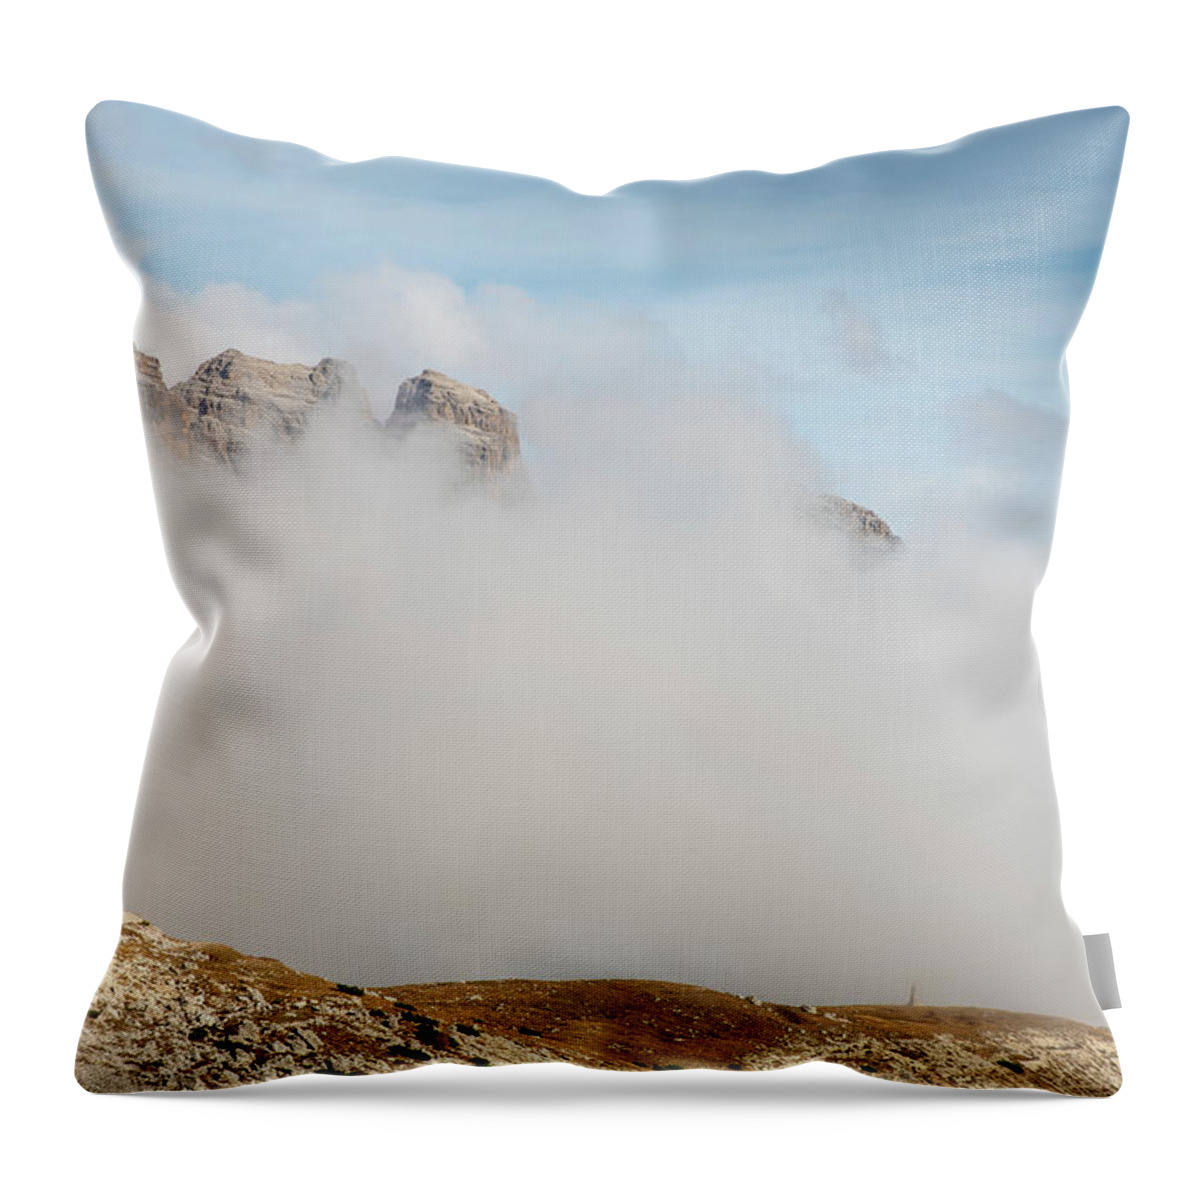 Tre Cime Throw Pillow featuring the photograph Mountain landscape with fog in autumn. Tre Cime dolomiti Italy. by Michalakis Ppalis